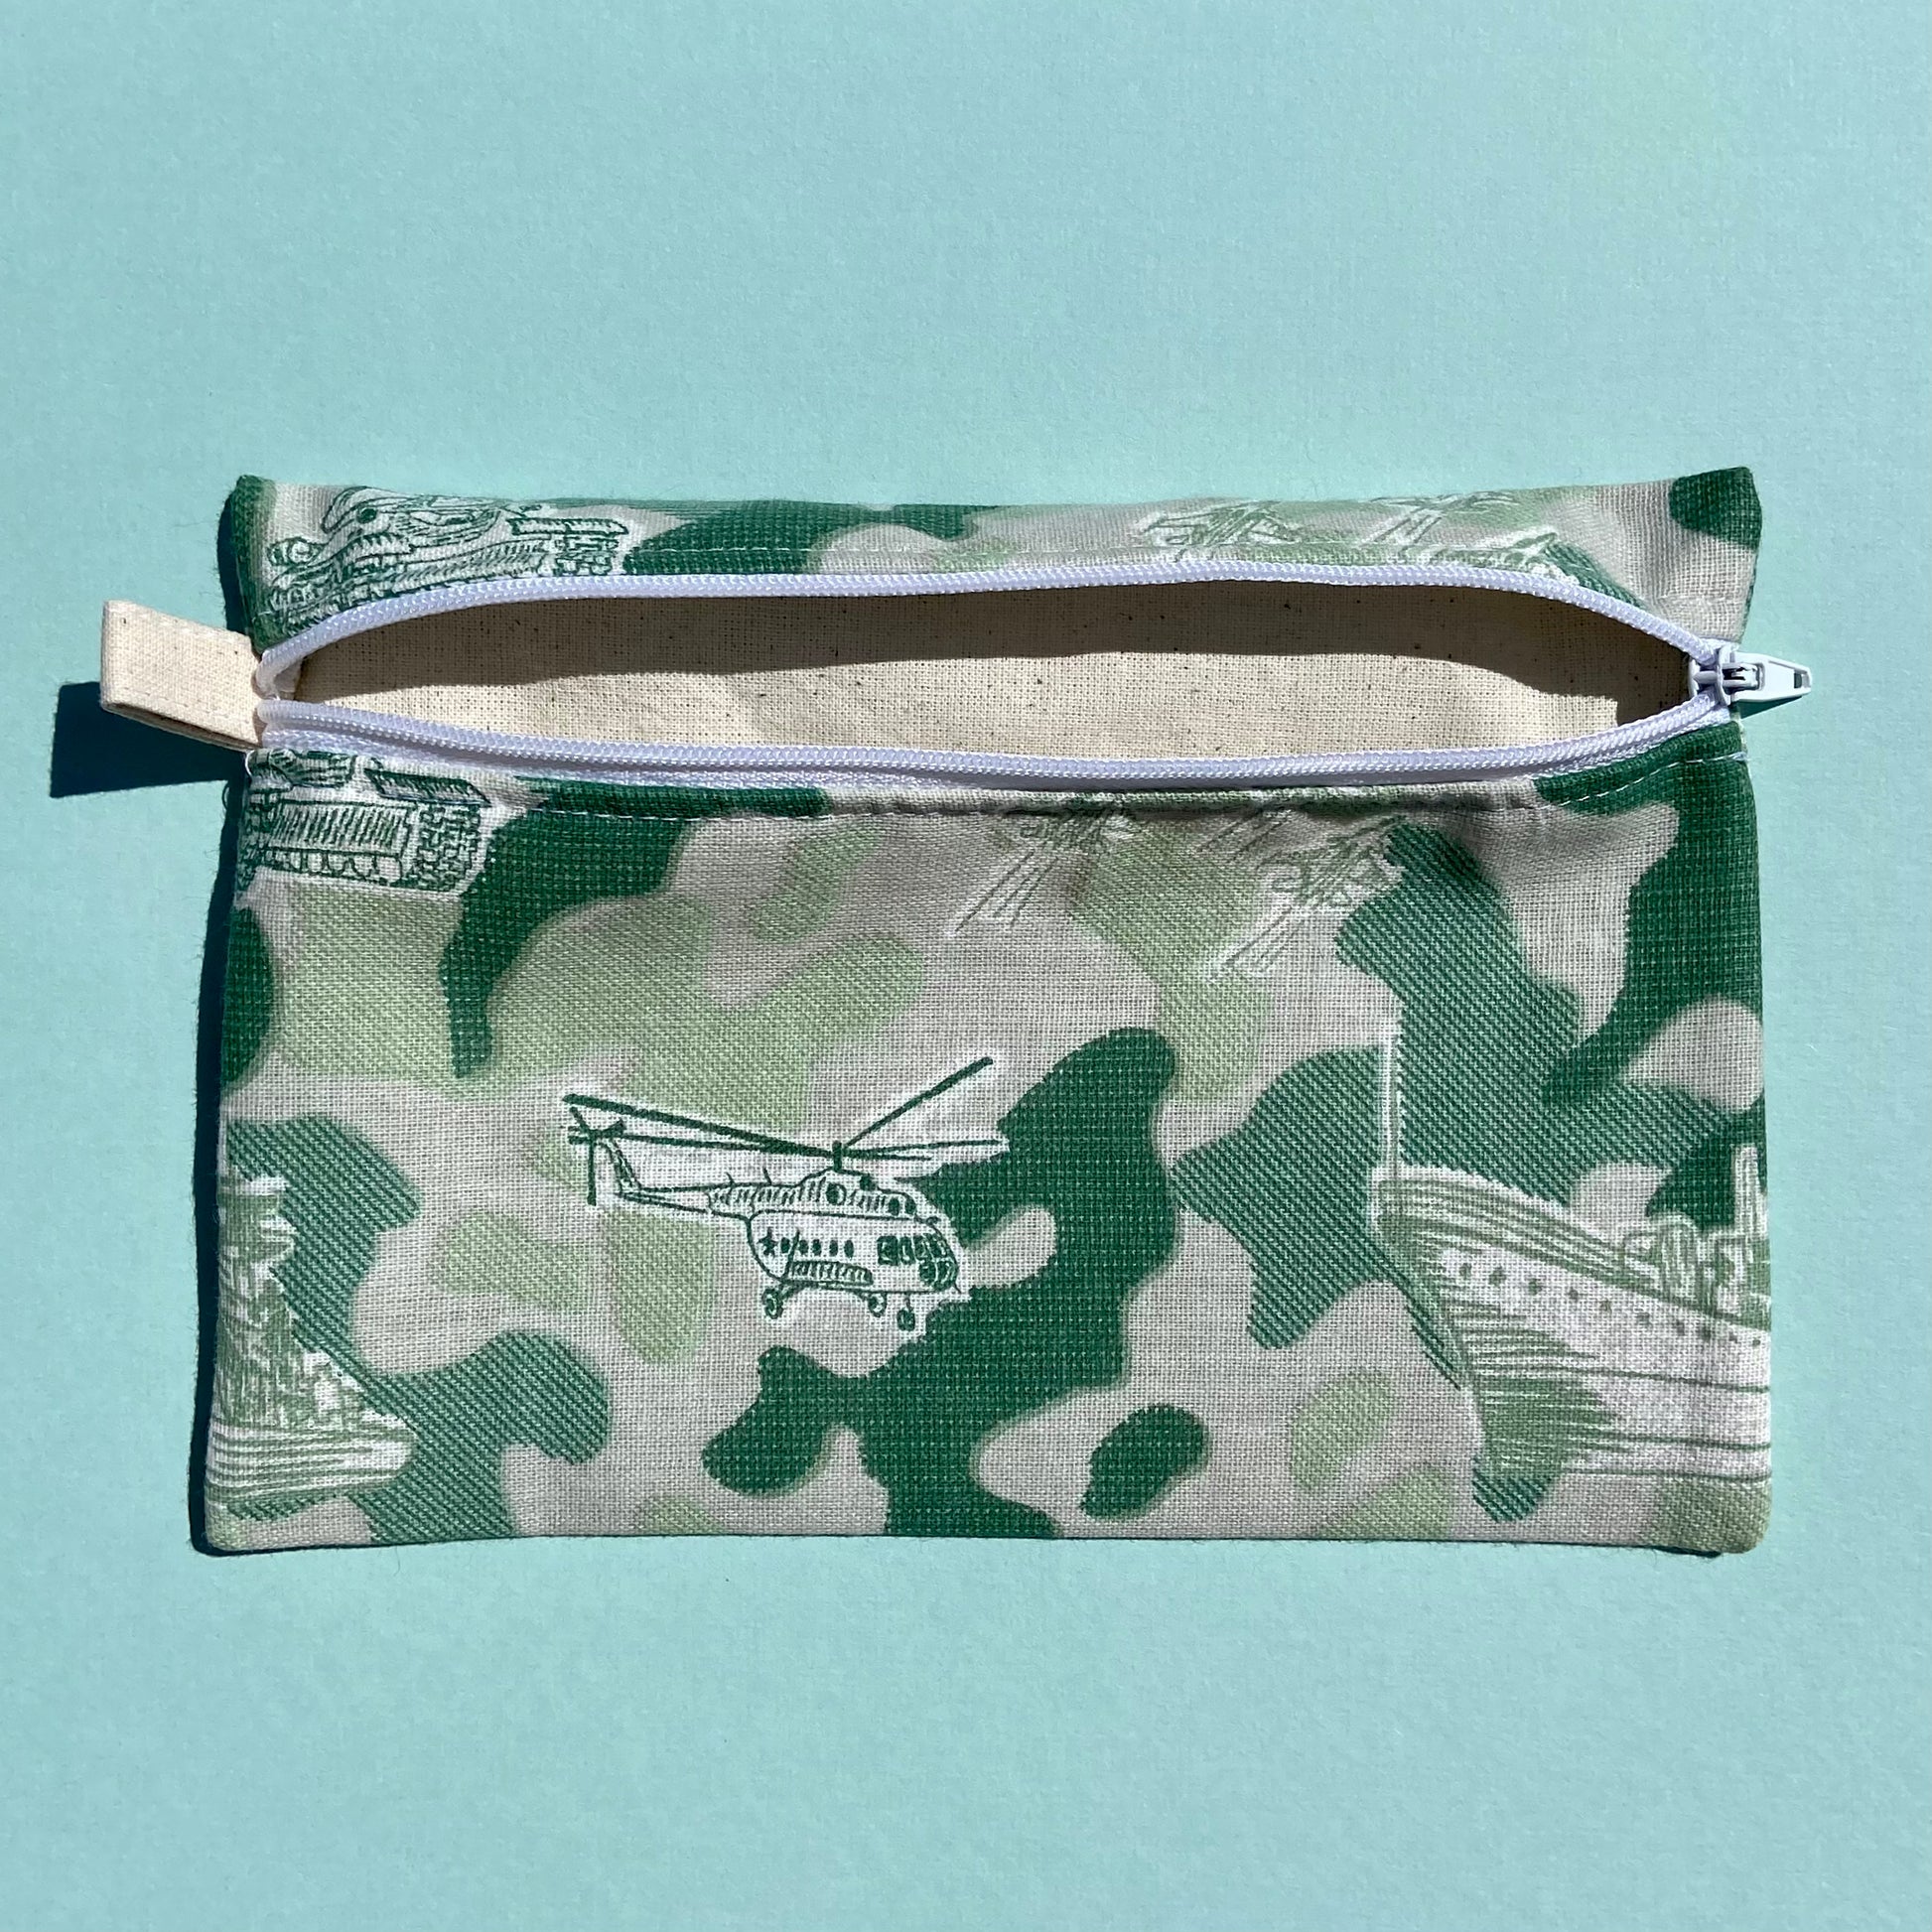 Army camp handmade pouch with green toy army soldiers 